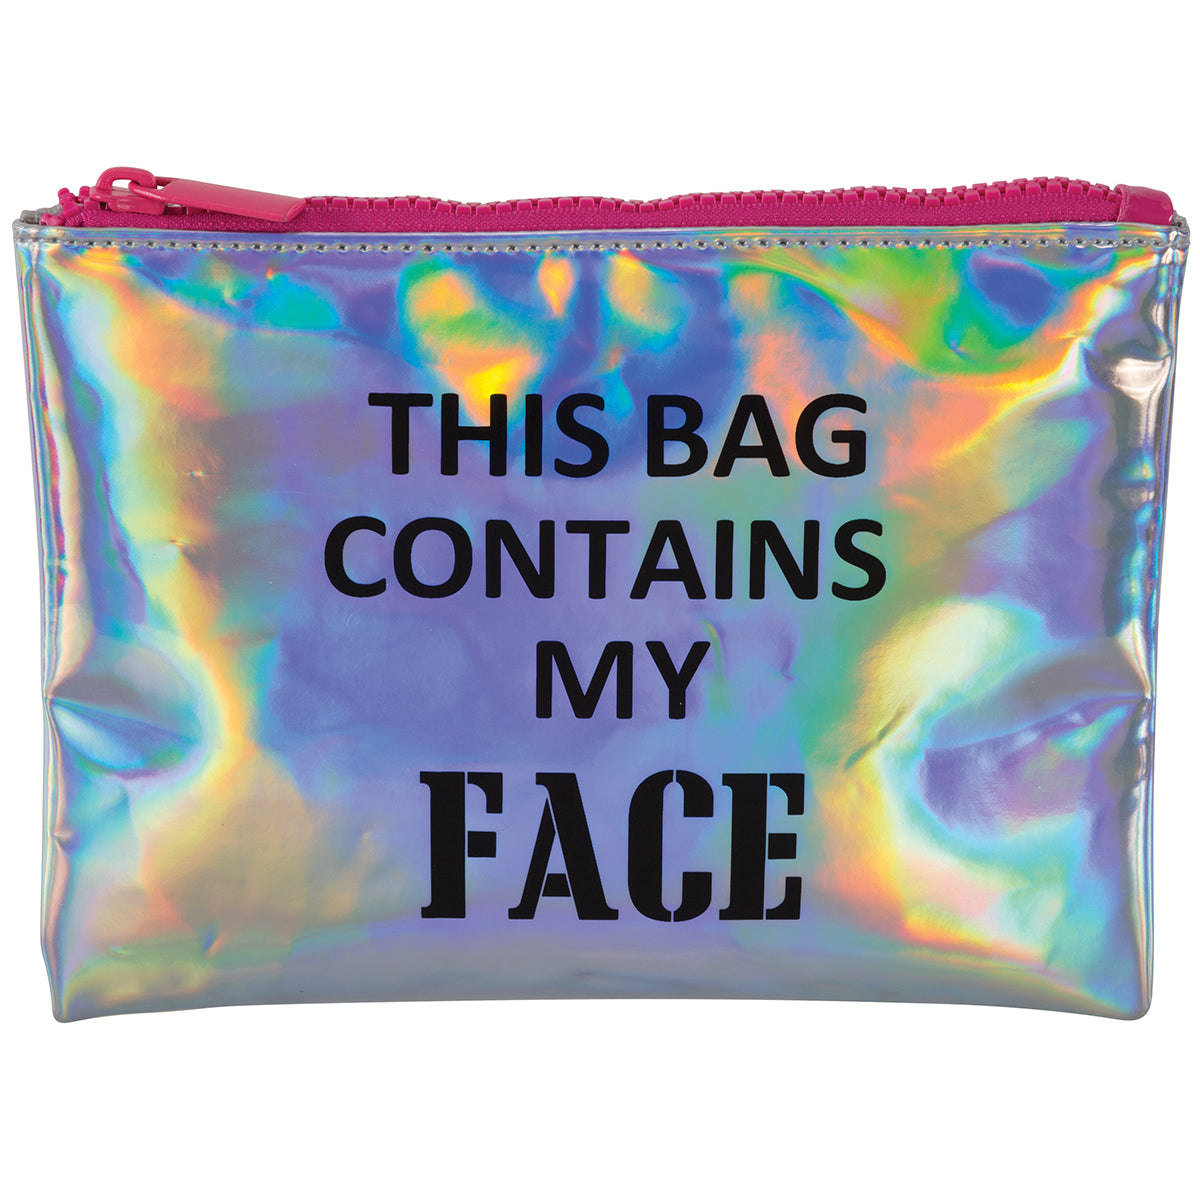 This Bag Contains My Face Cosmetics Bag